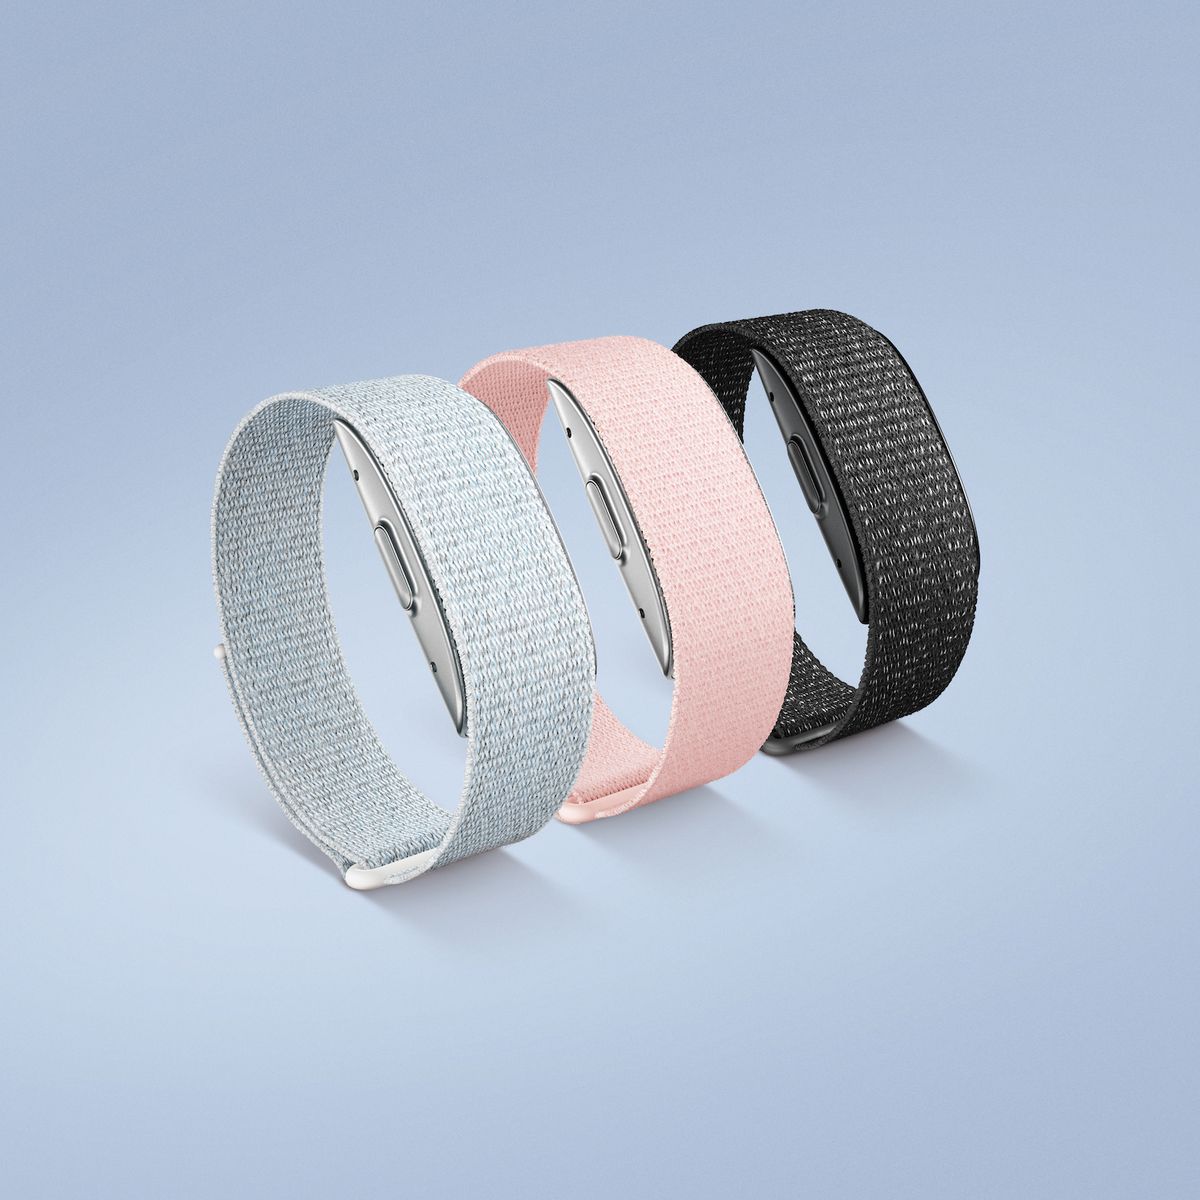 The three color options for the Halo Band